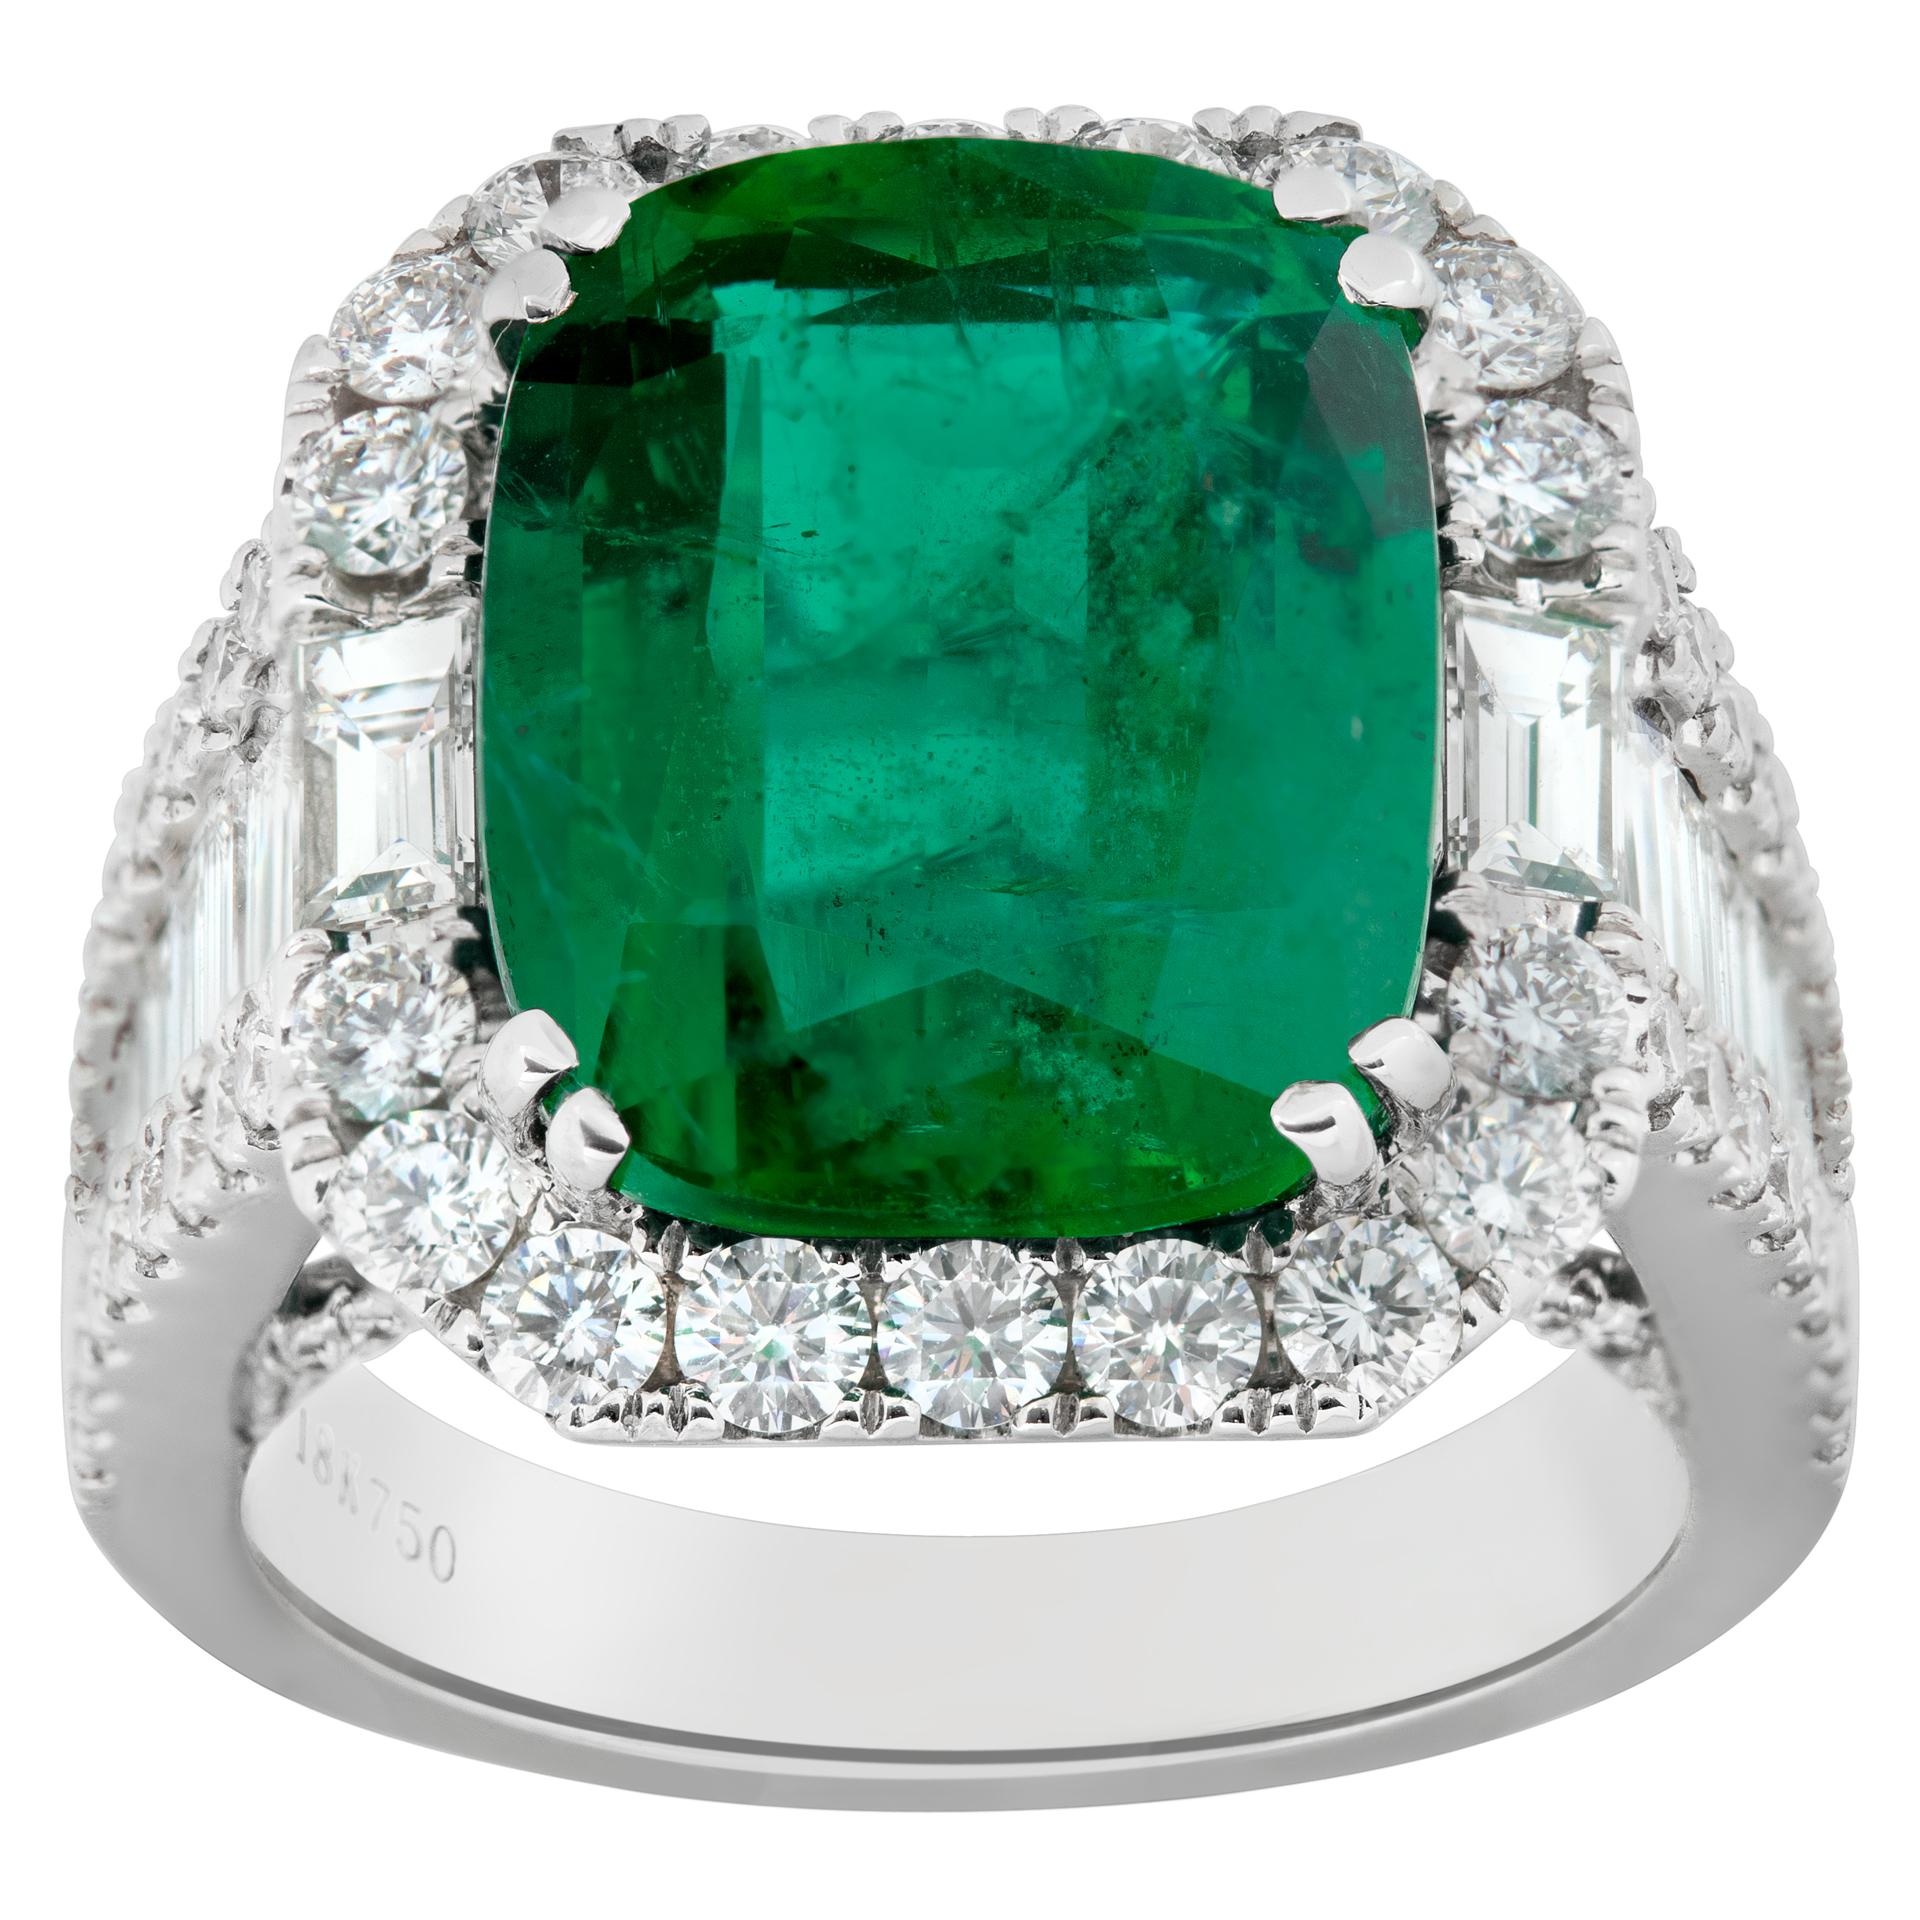 AGL Certified Emerald ring with diamonds in 18k white gold. Approximately 2.15 carats in diamonds (H-I color, SI clarity) and 6.45 carat center emerald. Ring size 6.This Emerald ring is currently size 6 and some items can be sized up or down, please